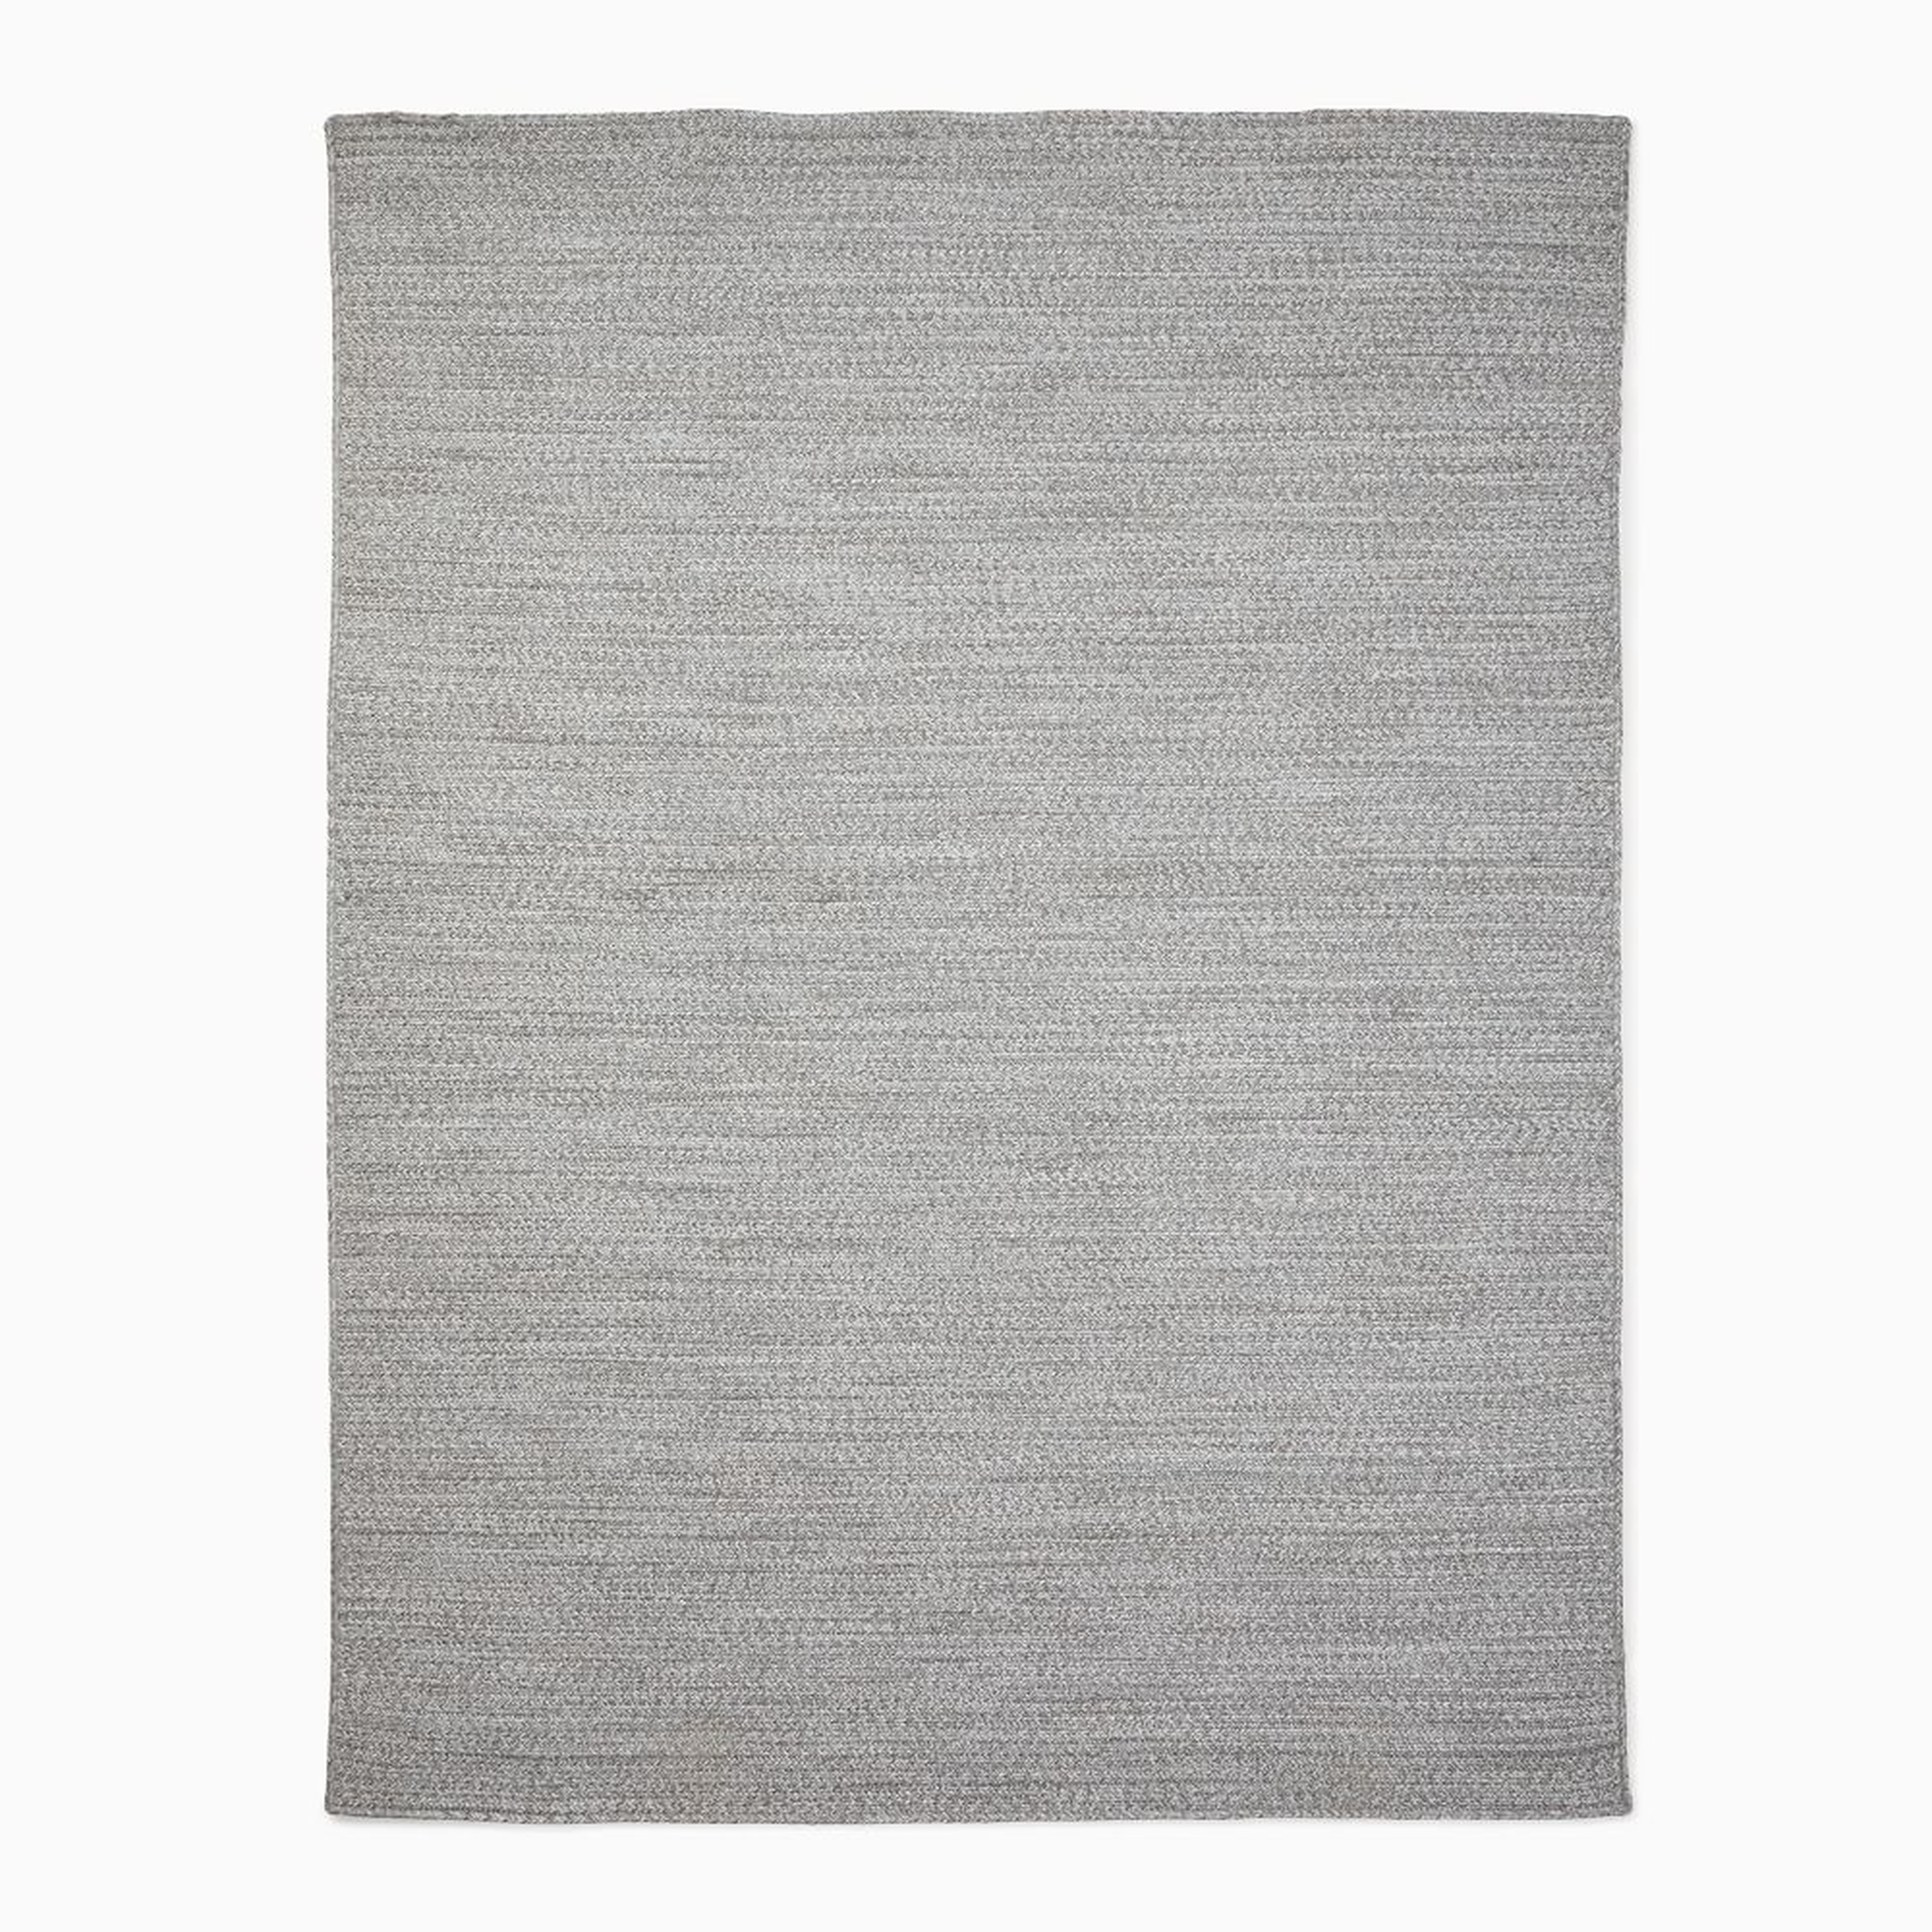 Woven Cable All Weather Rug, 9x12, Silver - West Elm